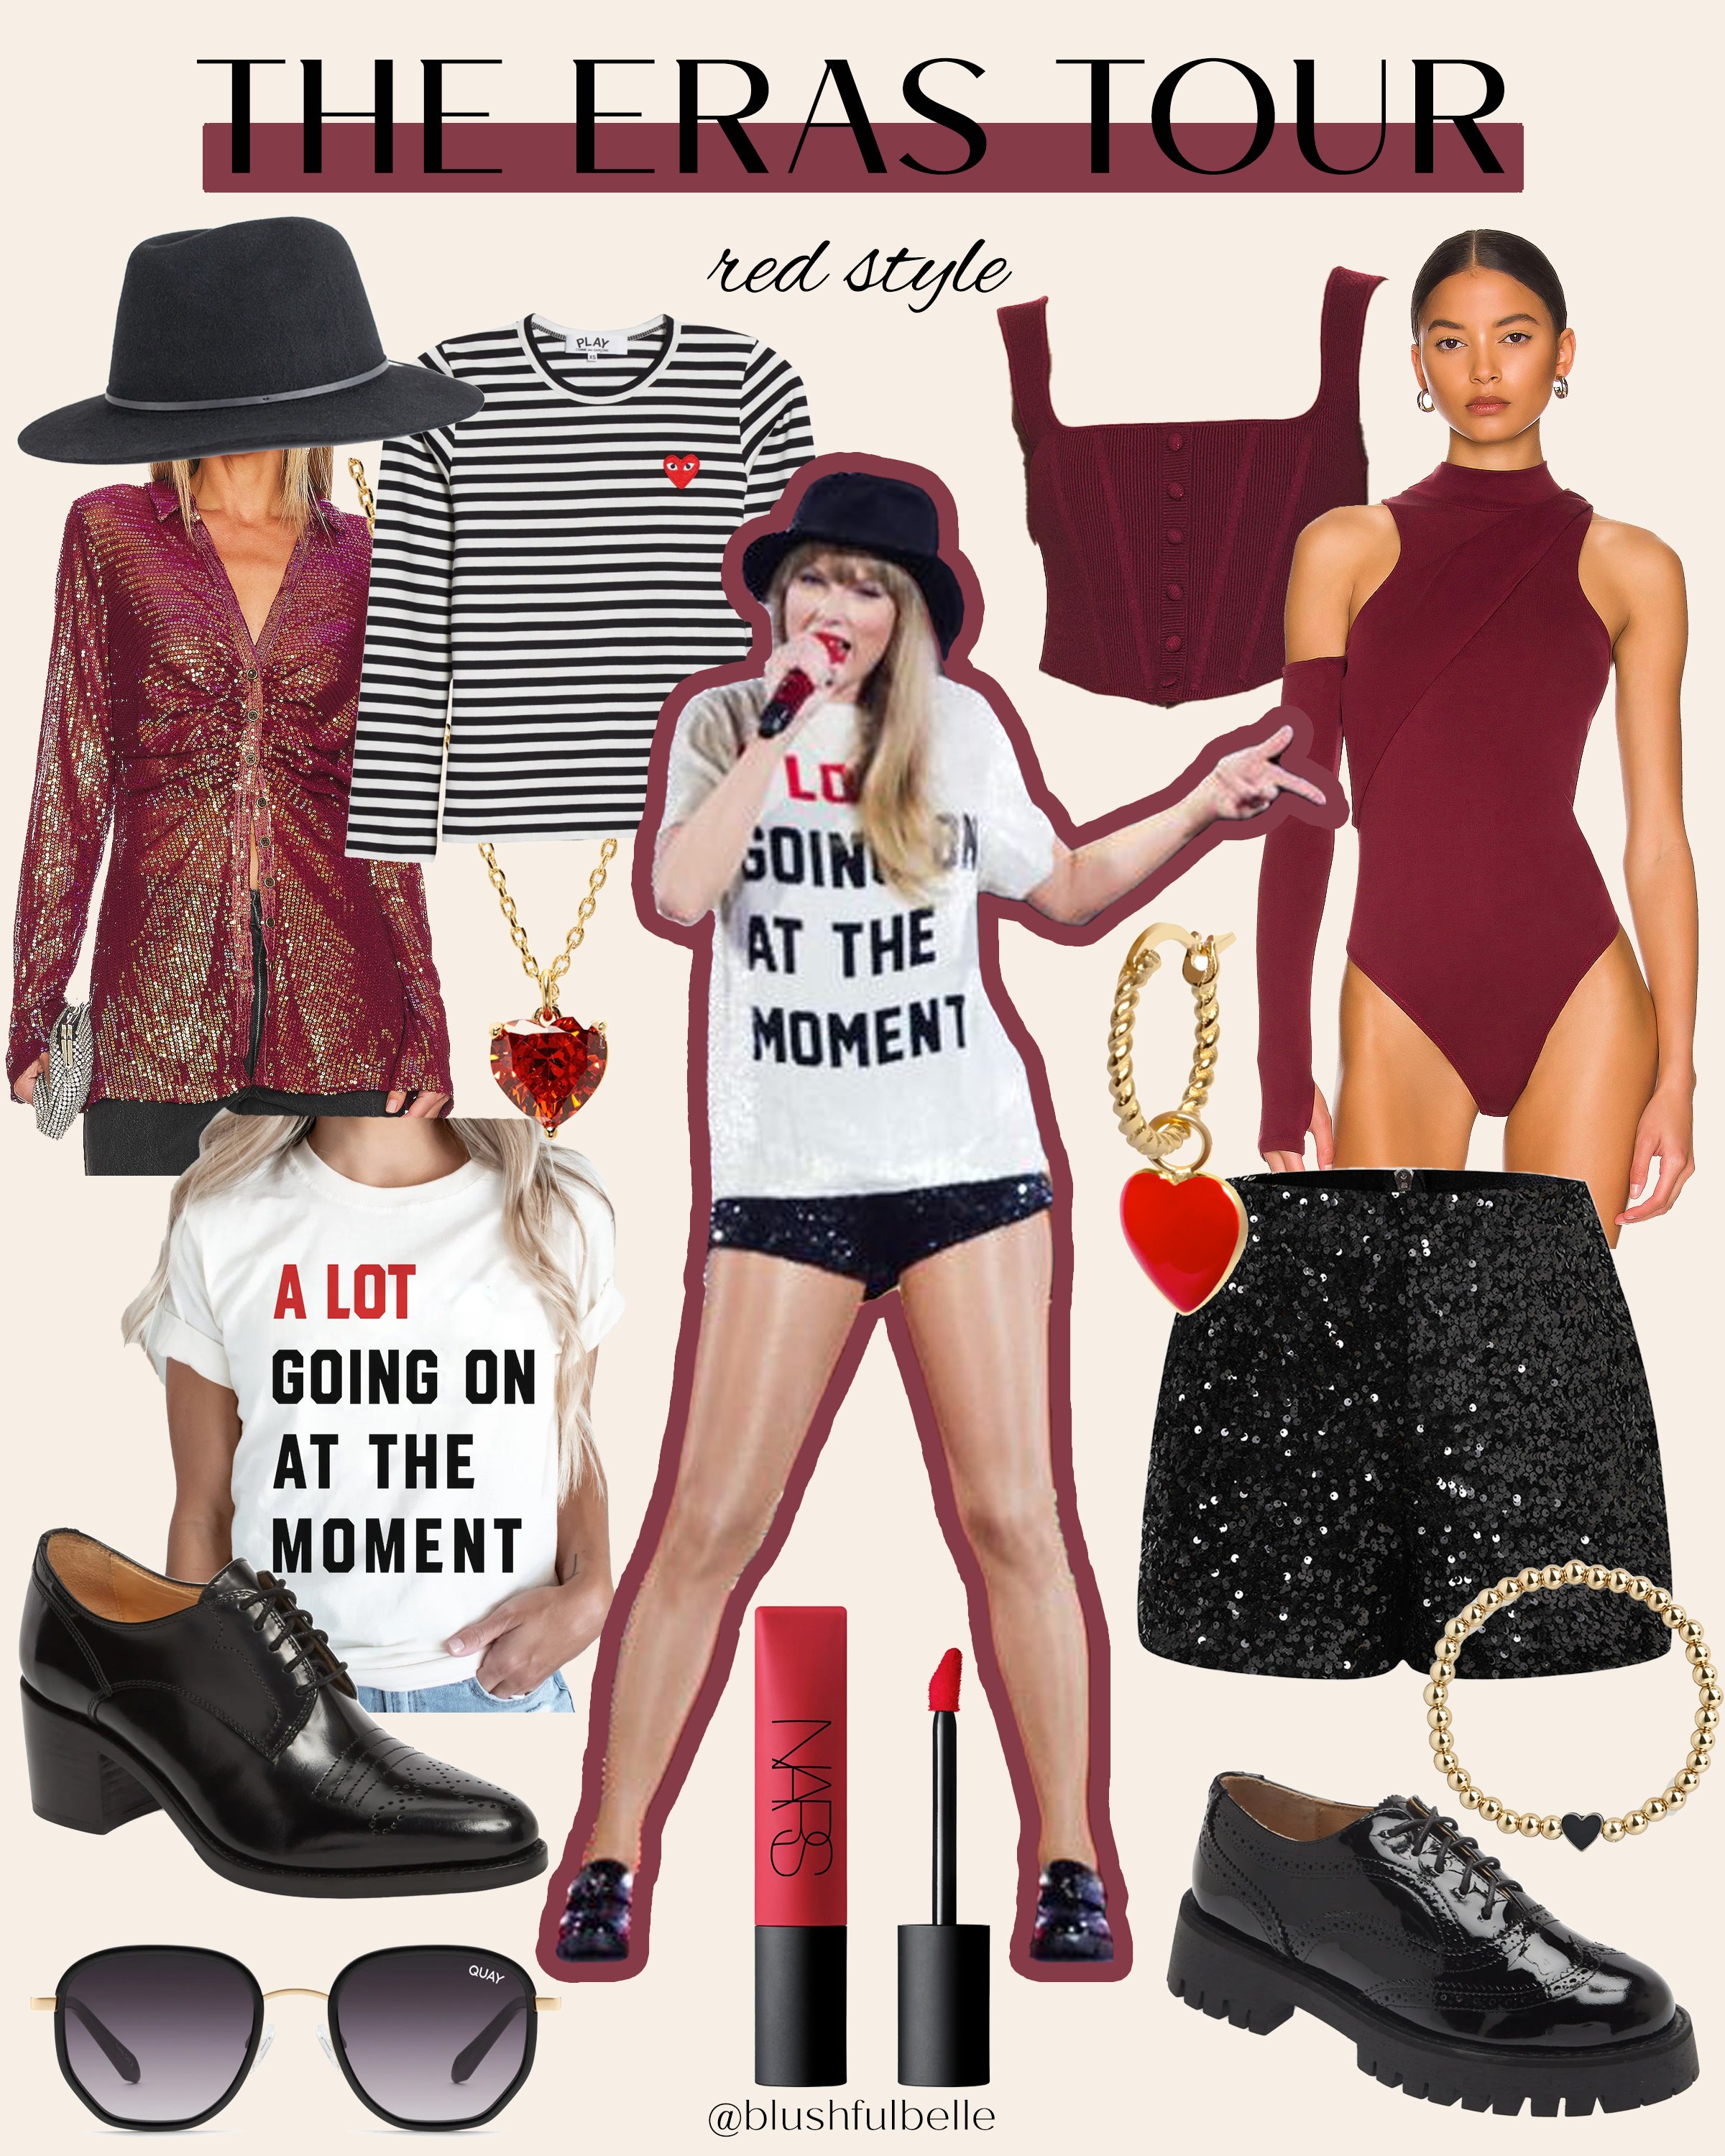 All of Taylor Swift's Eras Tour outfits